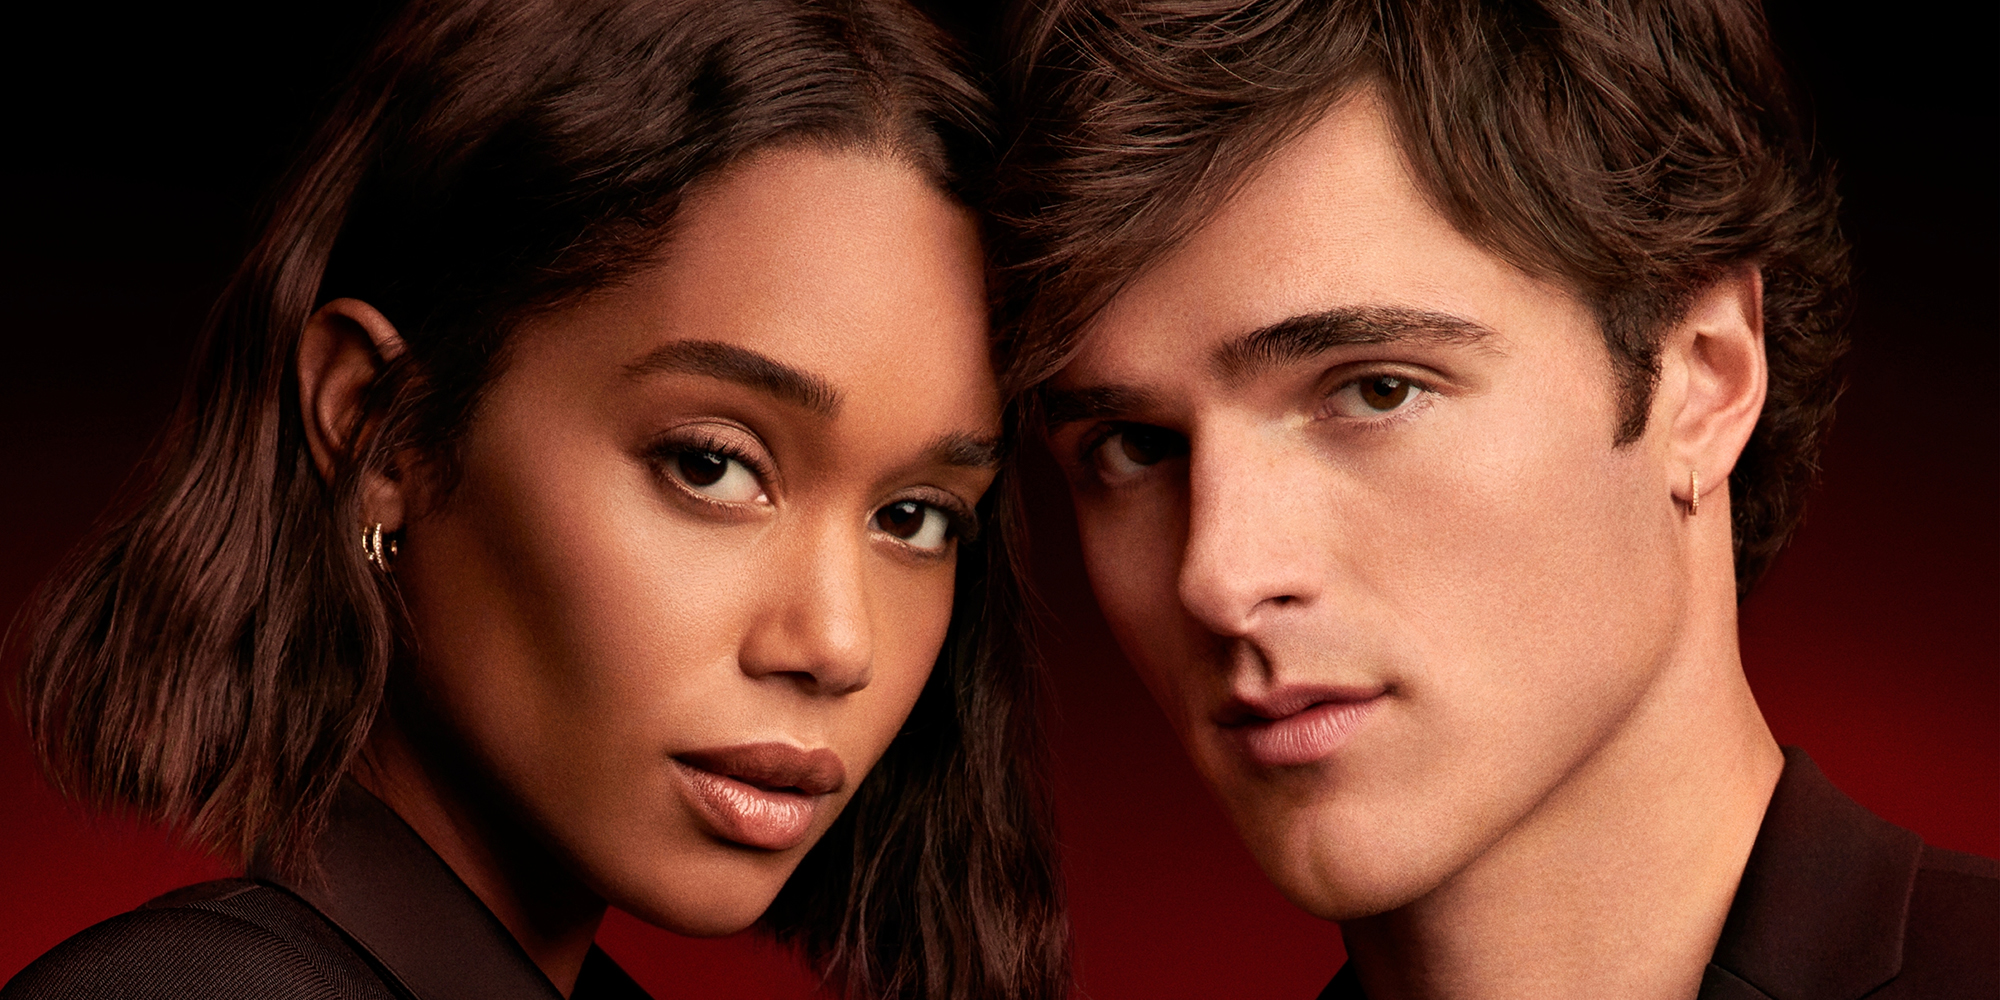 BOSS THE SCENT ELIXIR FRAGRANCE FILM STARRING JACOB ELORDI AND LAURA HARRIER